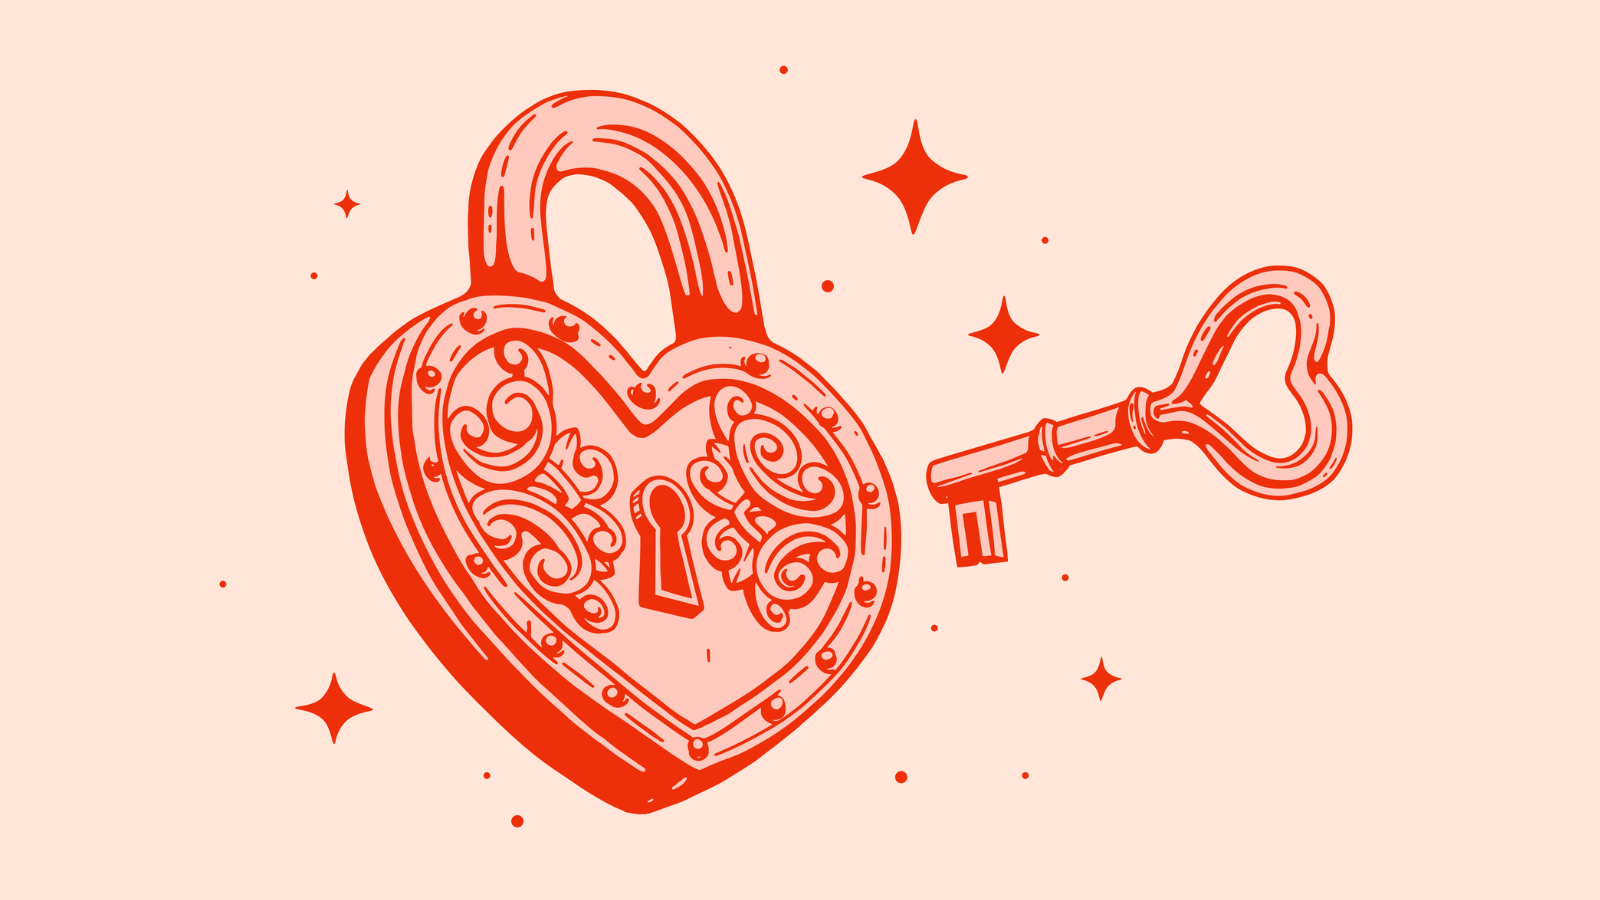 An illustration in red on a light coral background. A decorative heart shaped lock with a heart shaped key beside it. There are stars featured throughout the graphic.